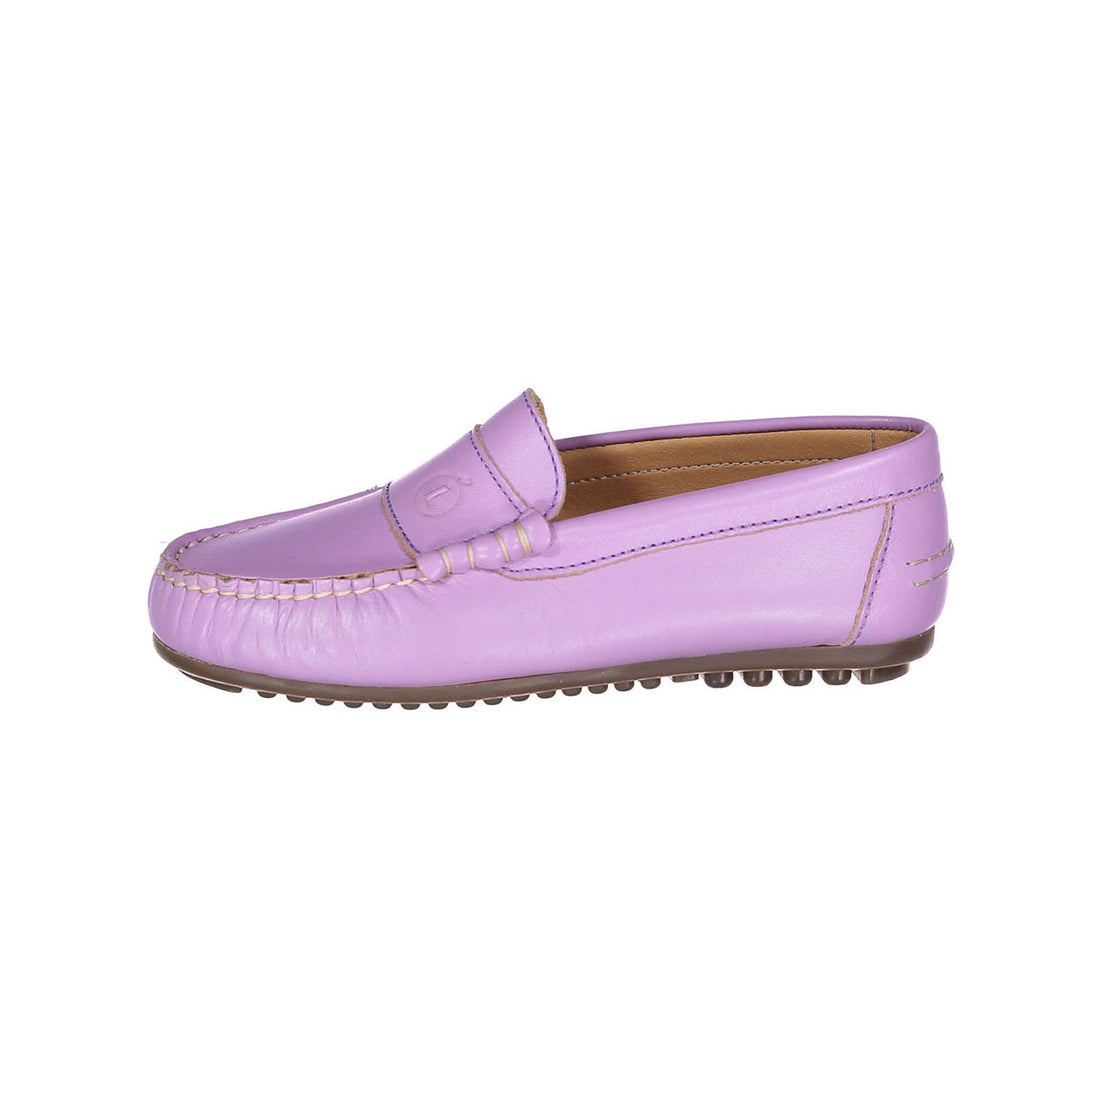 Ladida Lilac Loafer